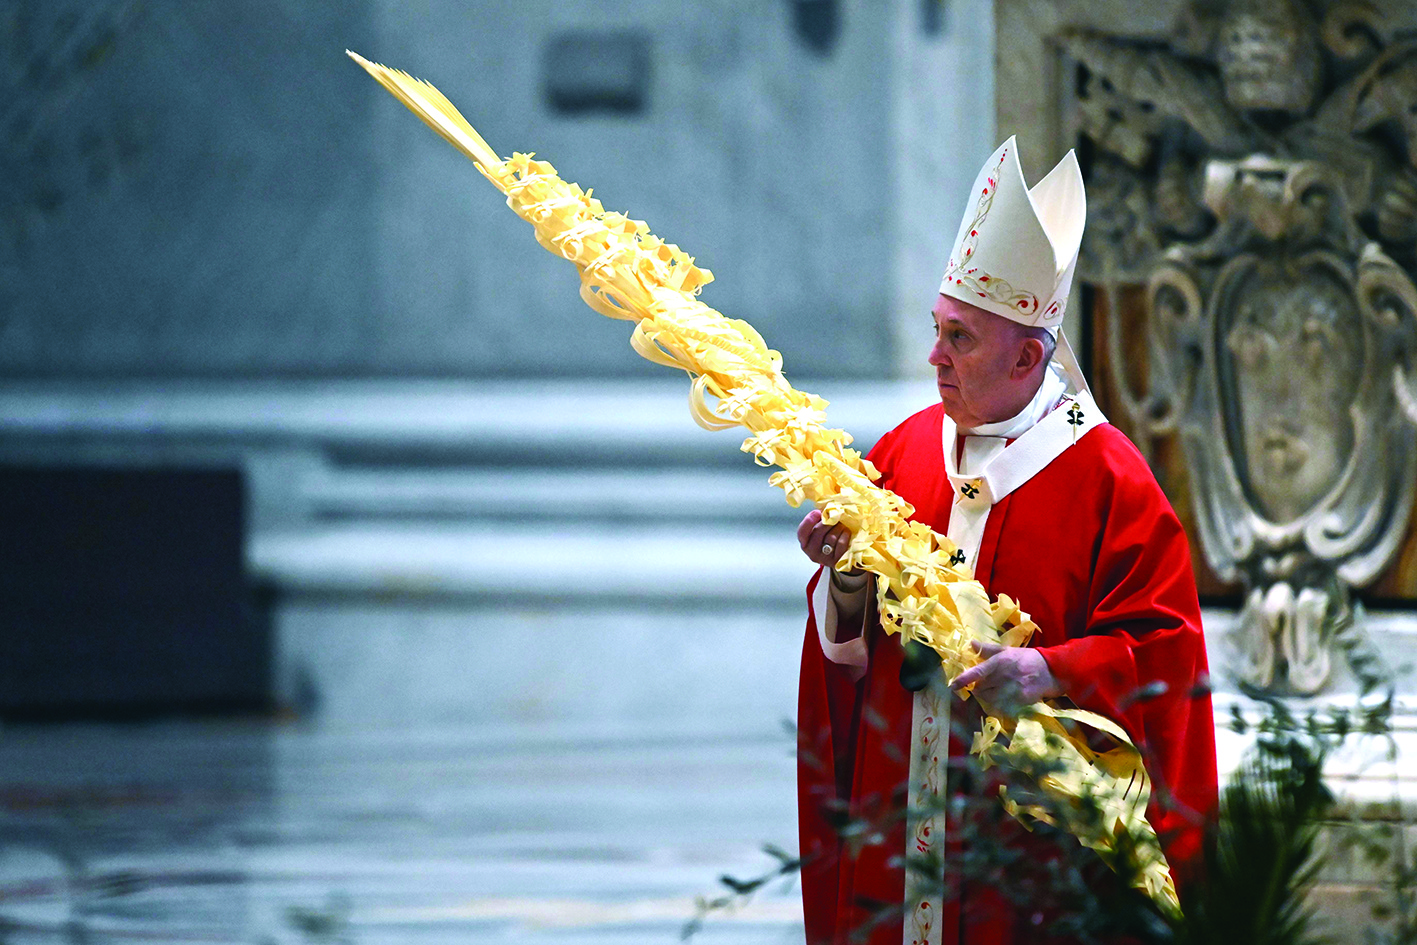 Pope Francis holds a palm branch as he celebrates Palm Sunday mass behind closed doors at St. Peter's Basilica mass on April 5, 2020 in The Vatican, during the lockdown aimed at curbing the spread of the COVID-19 infection, caused by the novel coronavirus. (Photo by Alberto PIZZOLI / POOL / AFP)